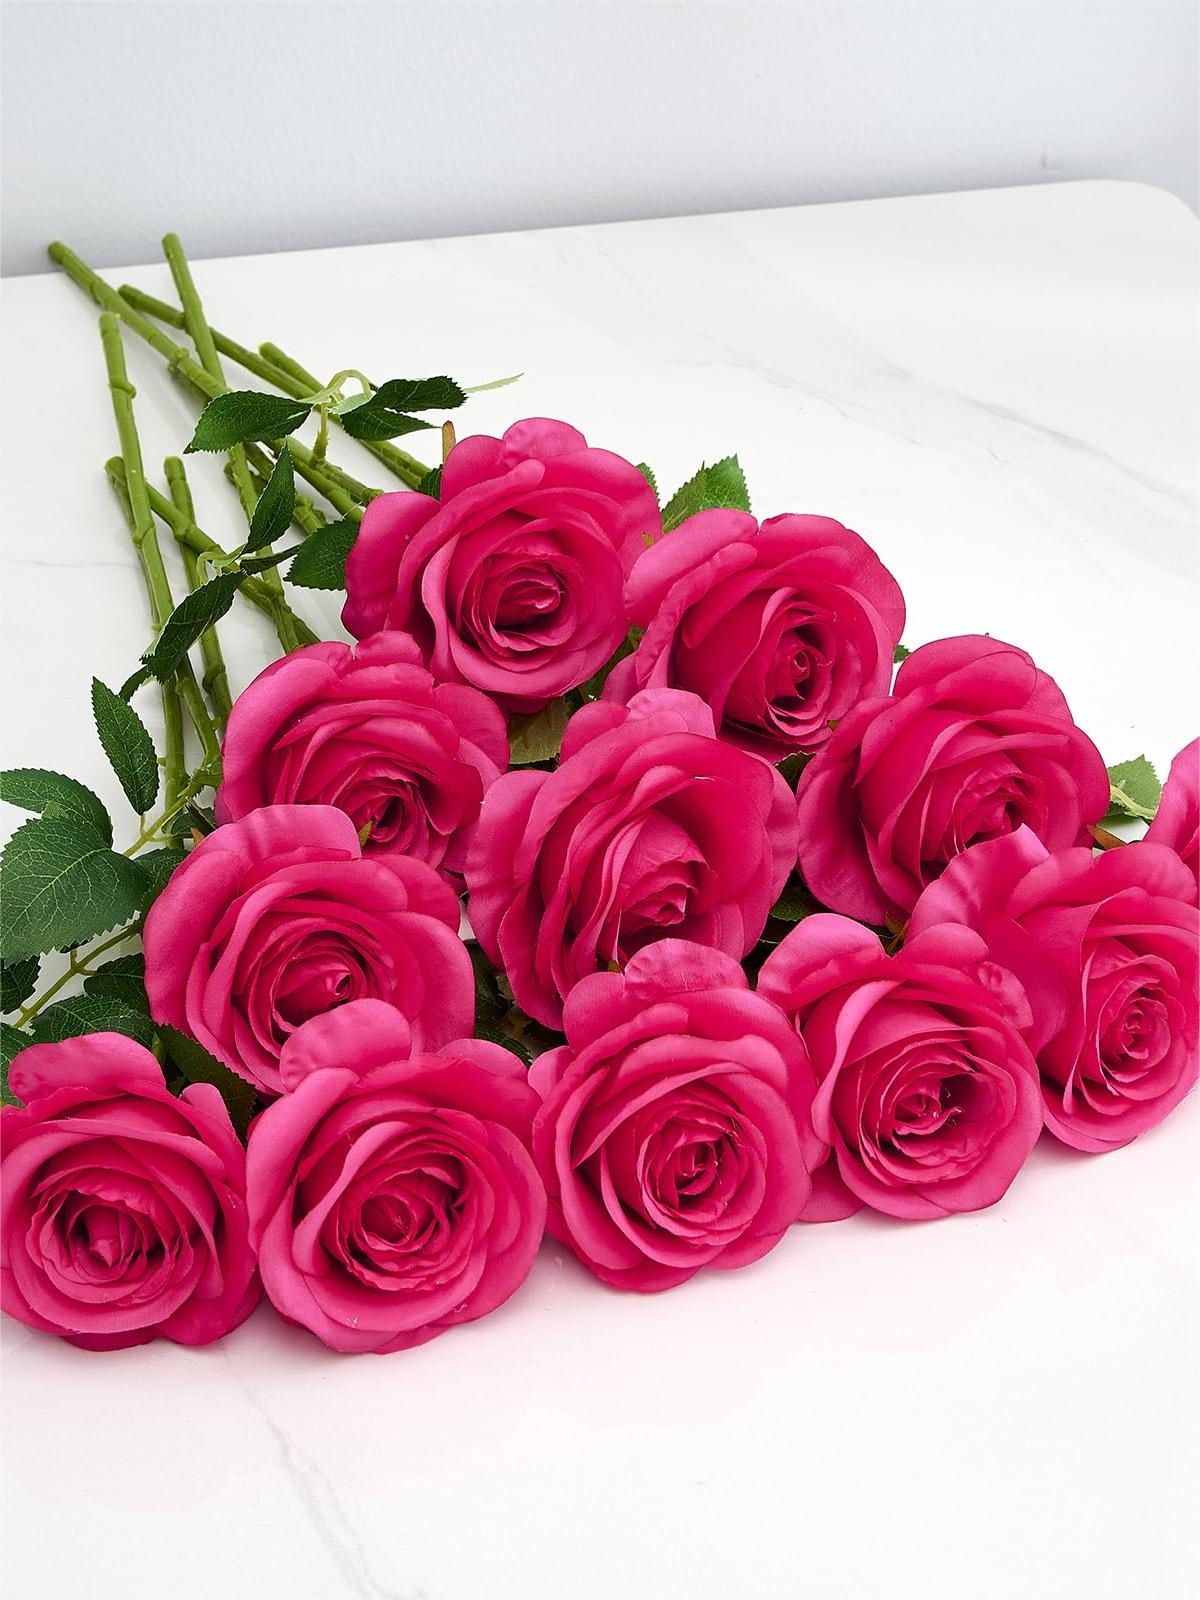 Rose Red Artificial Rose Flowers With Long Stems Wedding Bouquet Centerpieces Decorations HH8035